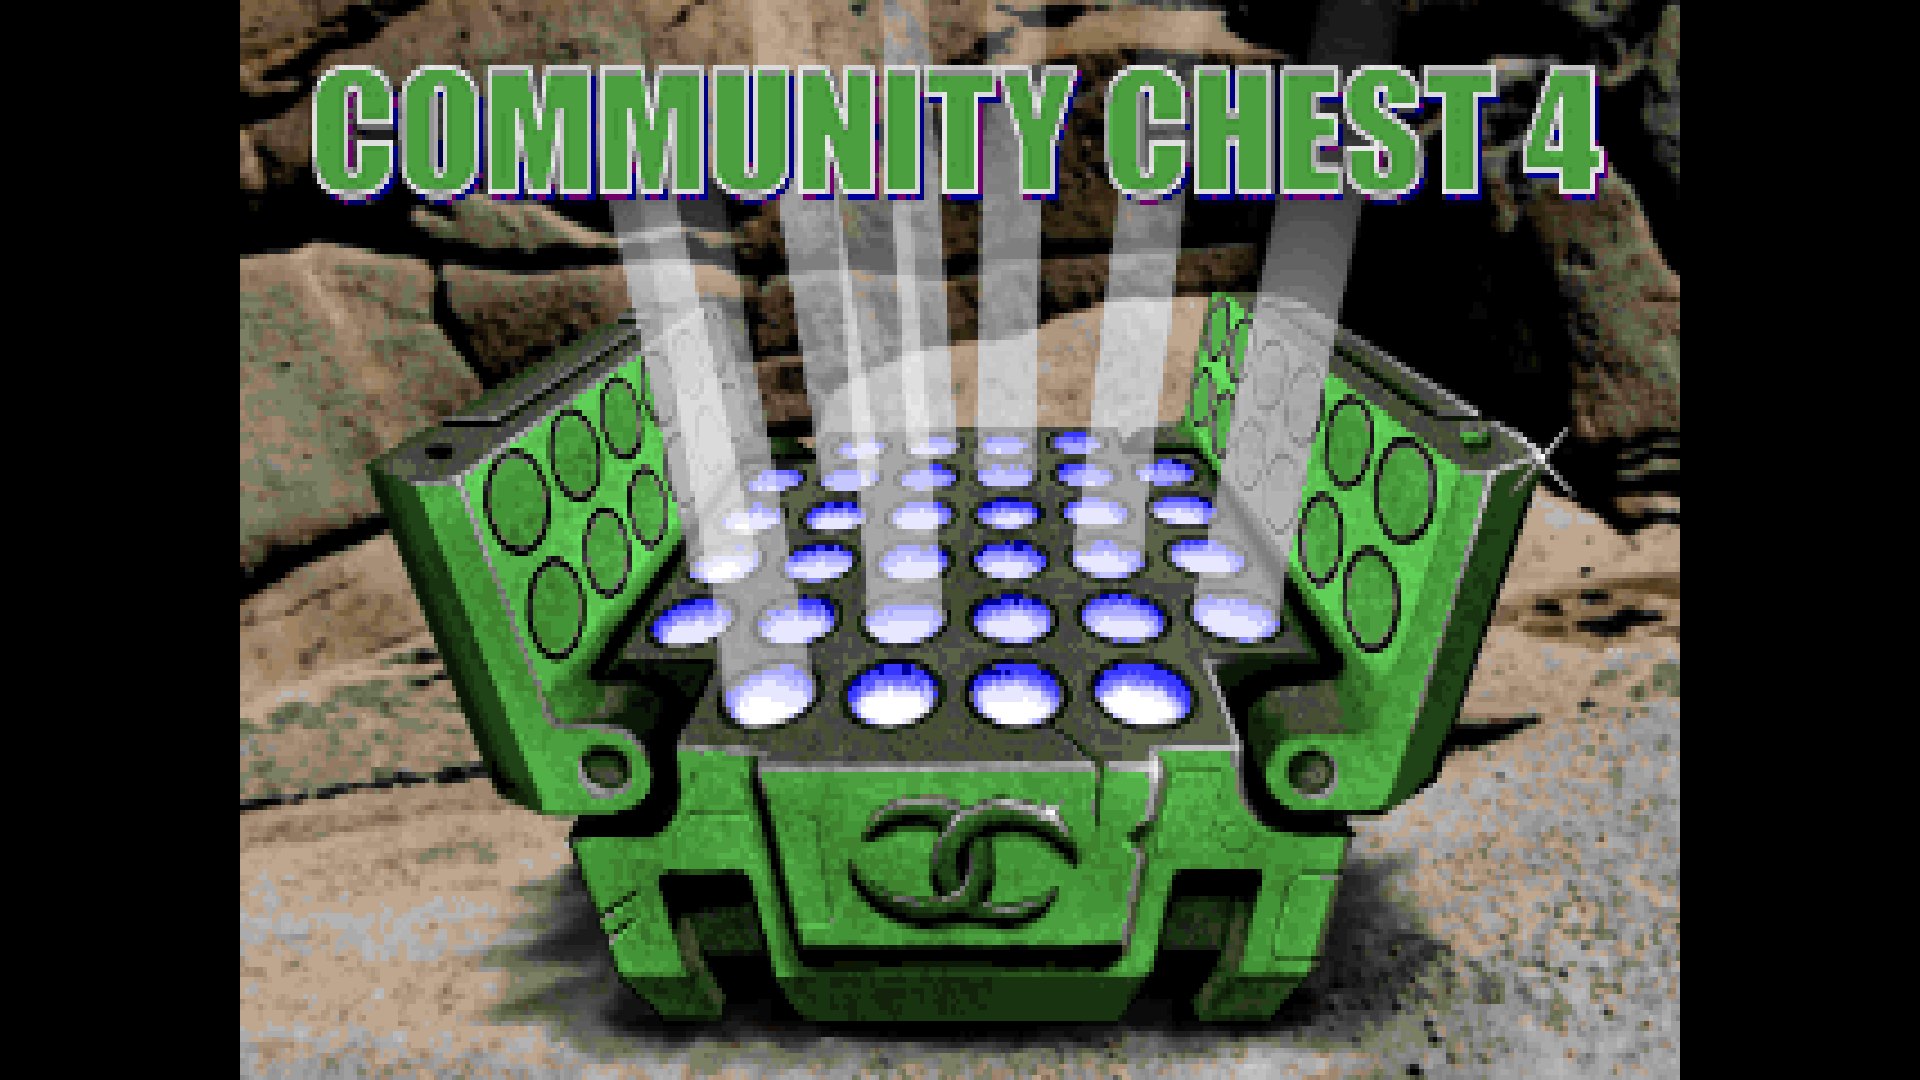 complex_community_chest_4